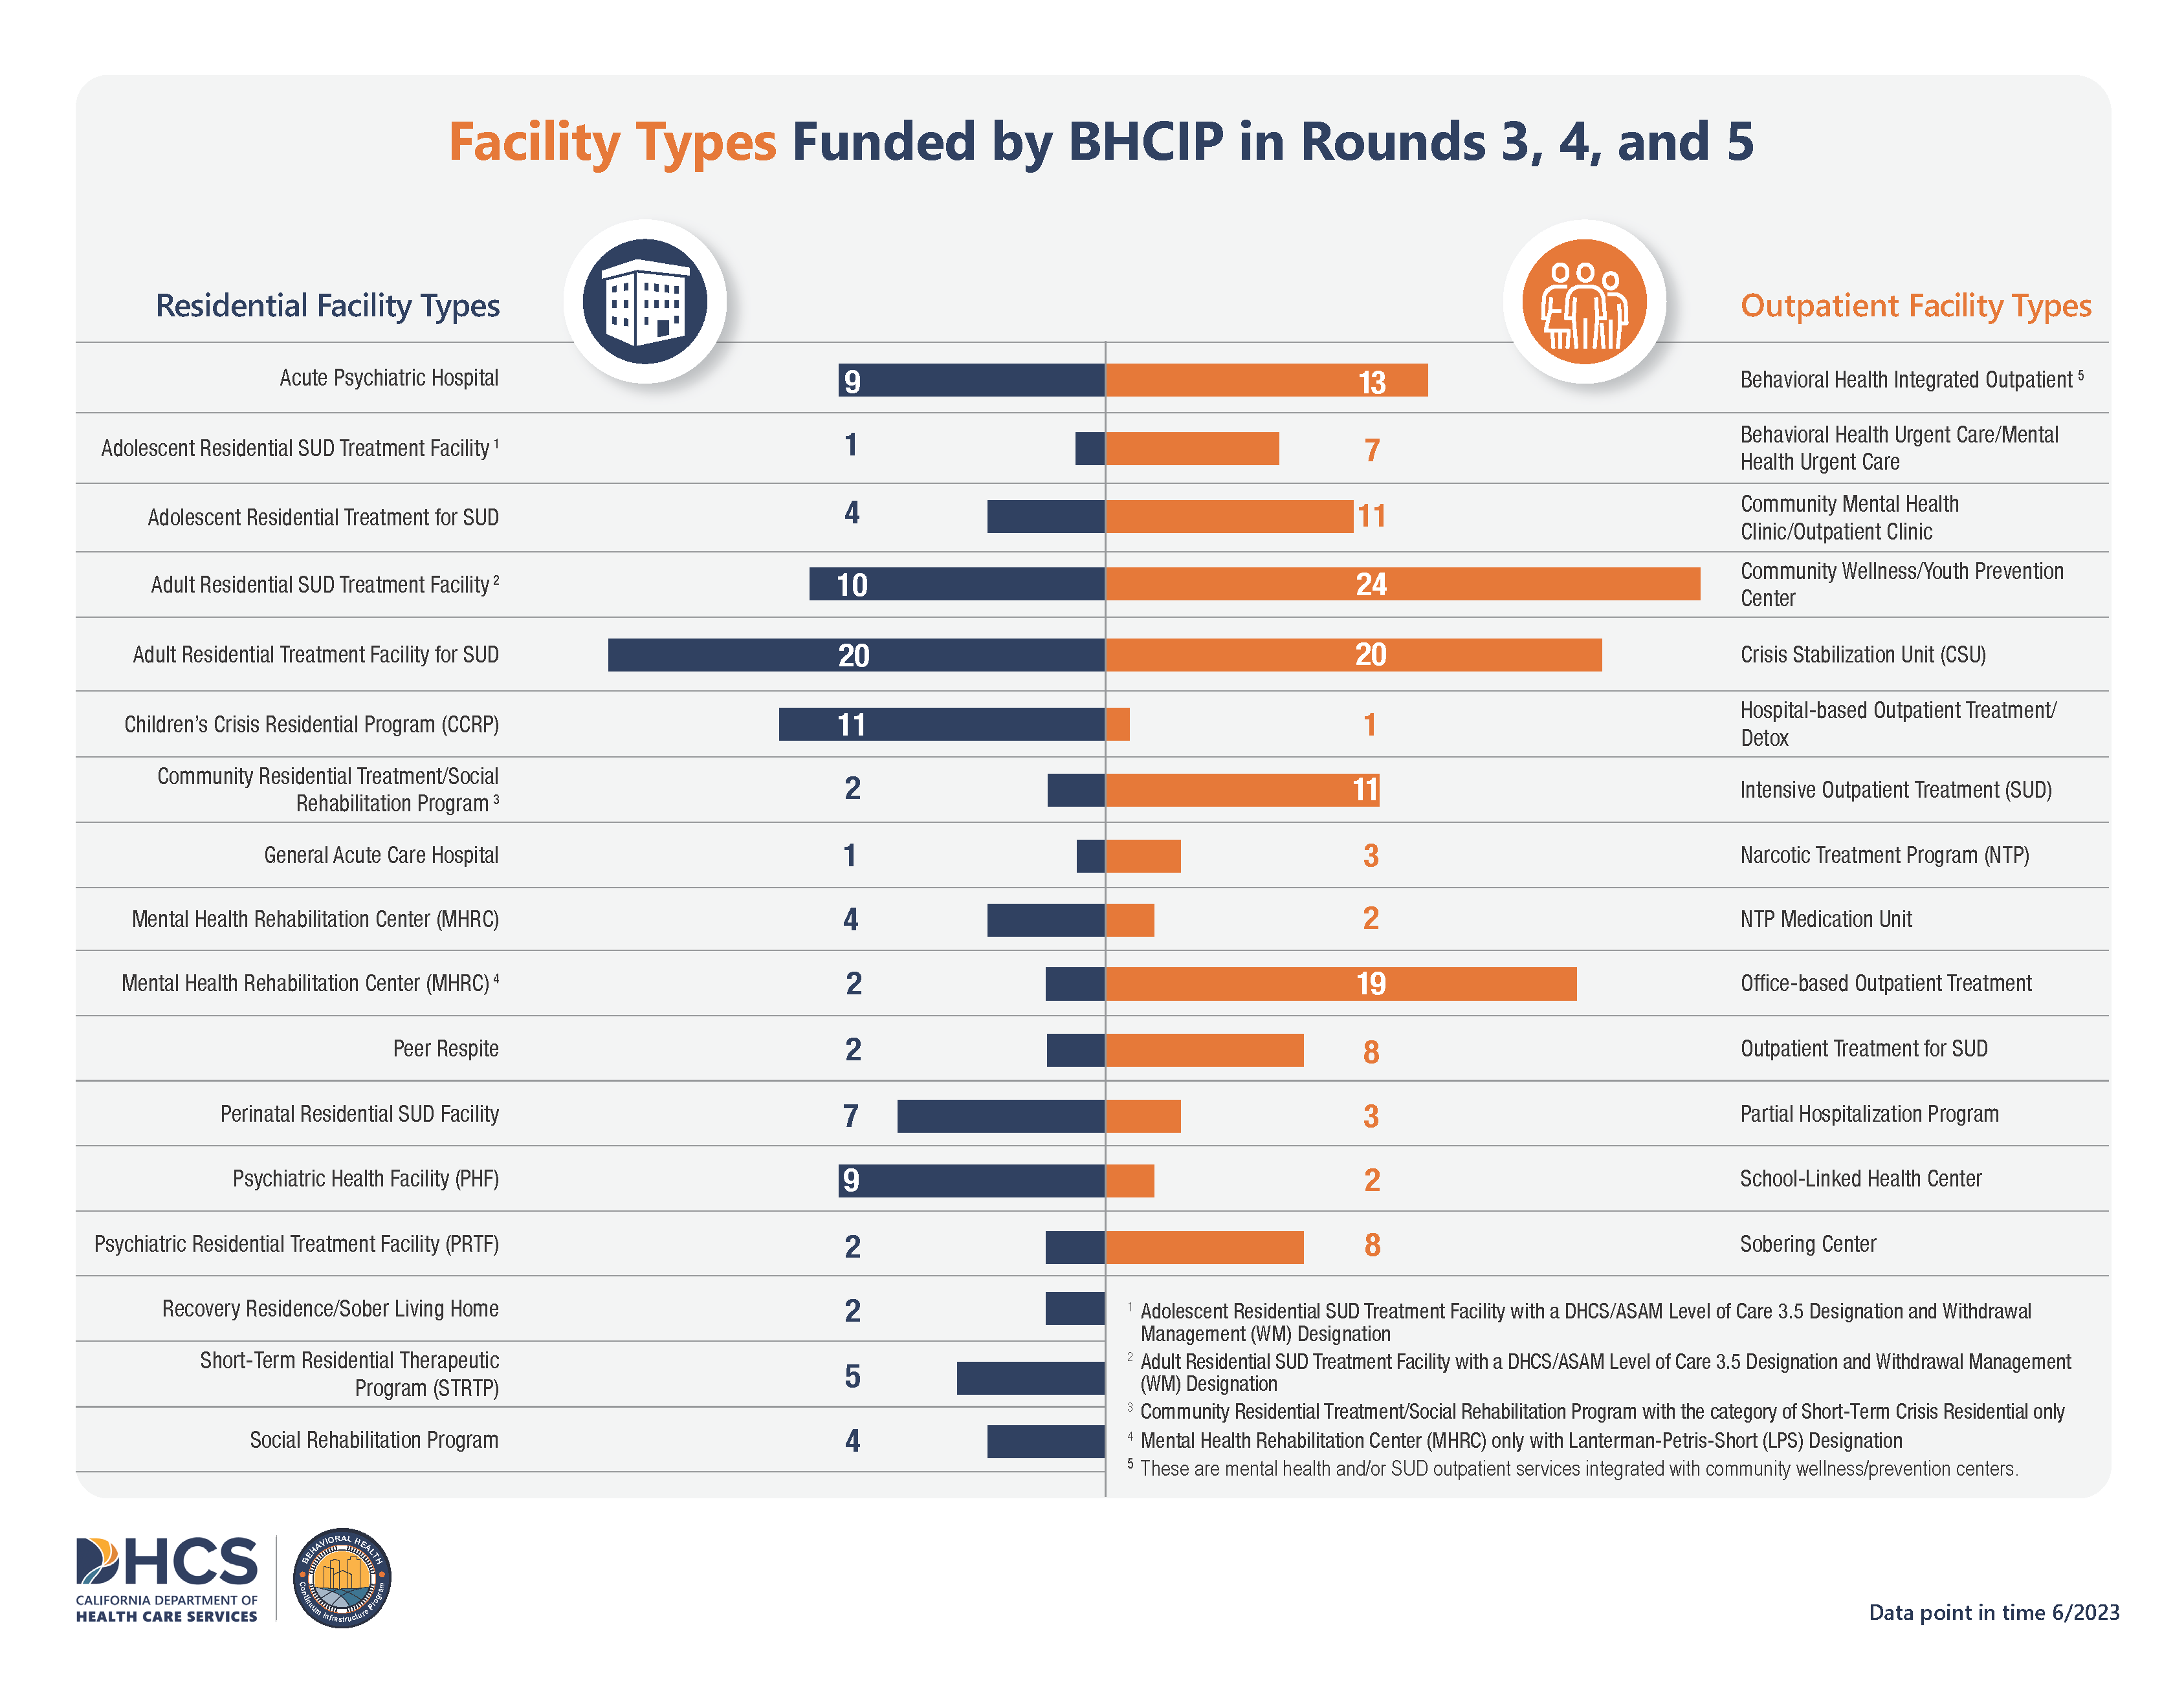 The Department of Health Care Services (DHCS) Facility Types Funded by BHCIP in Rounds 3, 4, and 5 Infographic